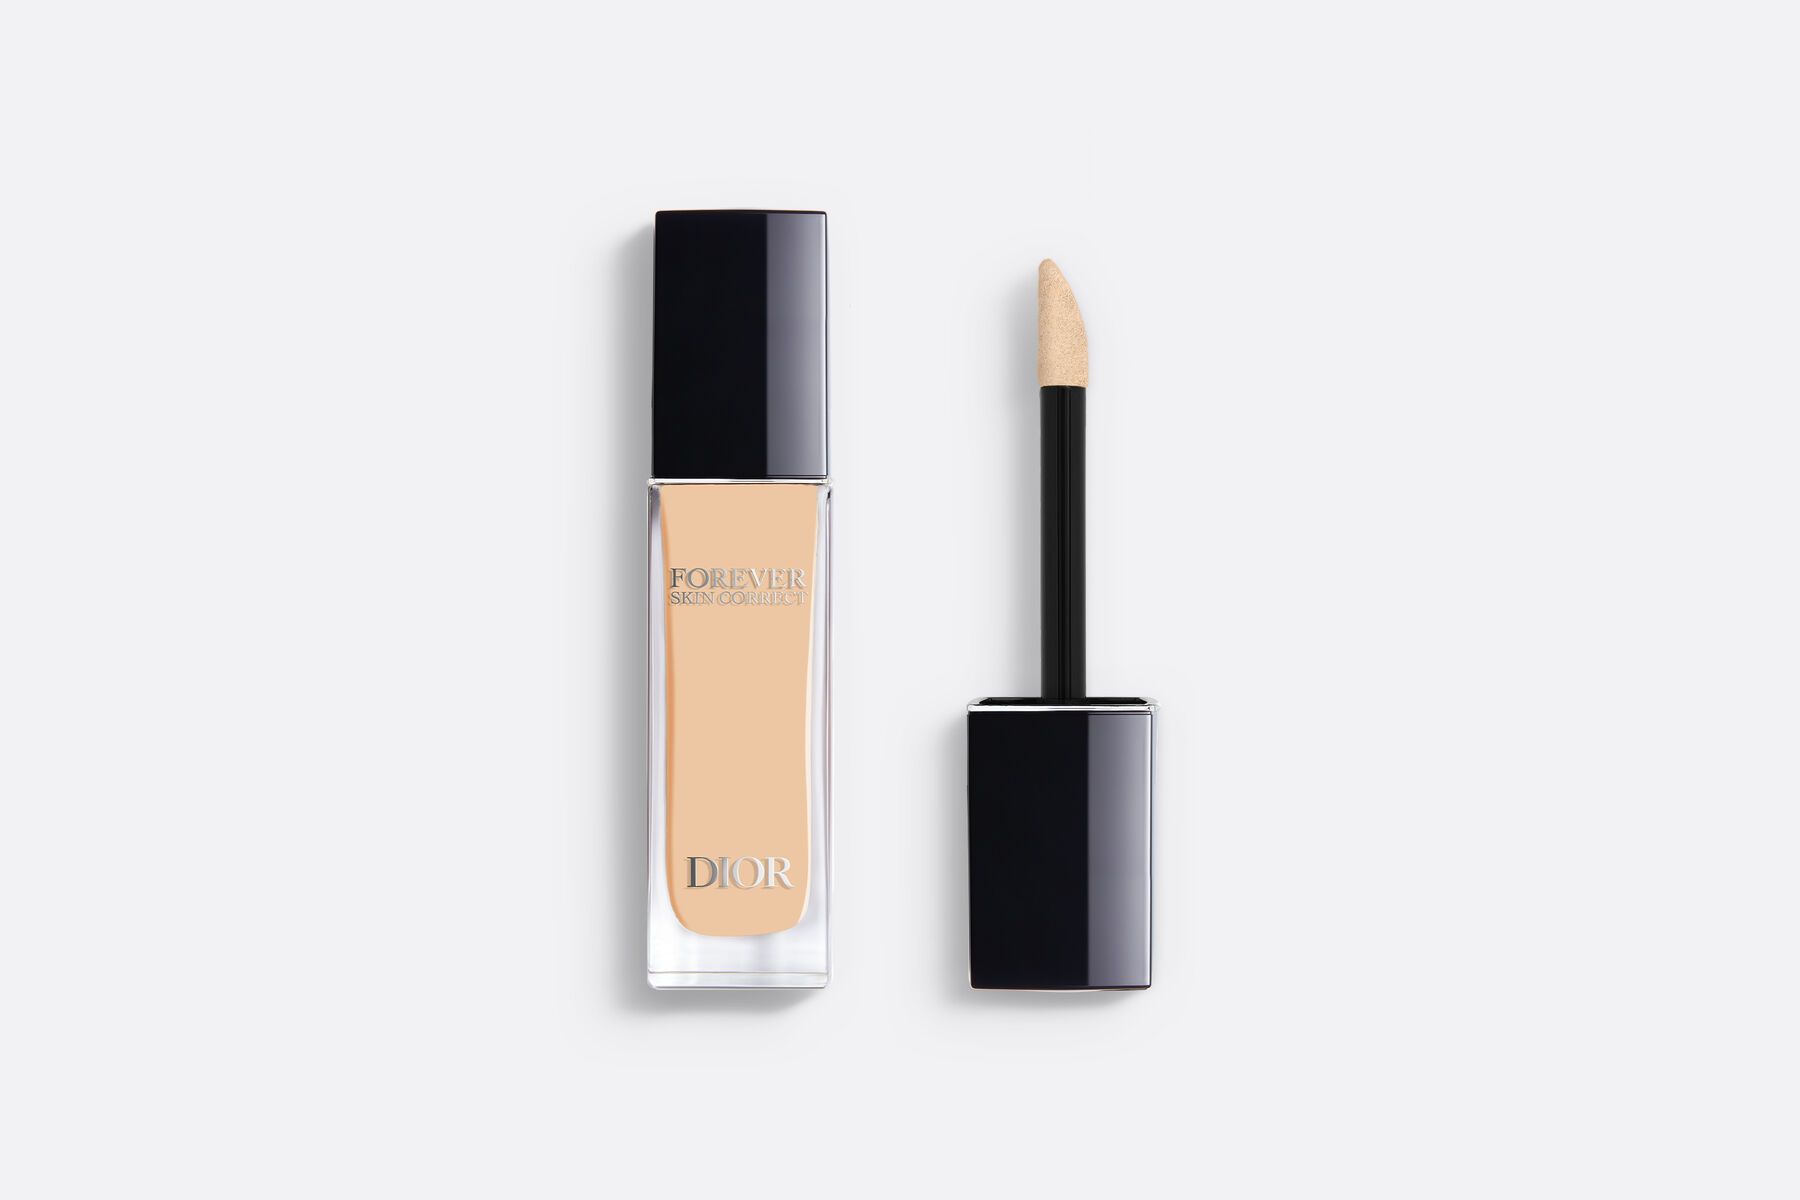 Dior Forever Skin Correct - Concealer and Corrector | Dior Beauty (US)